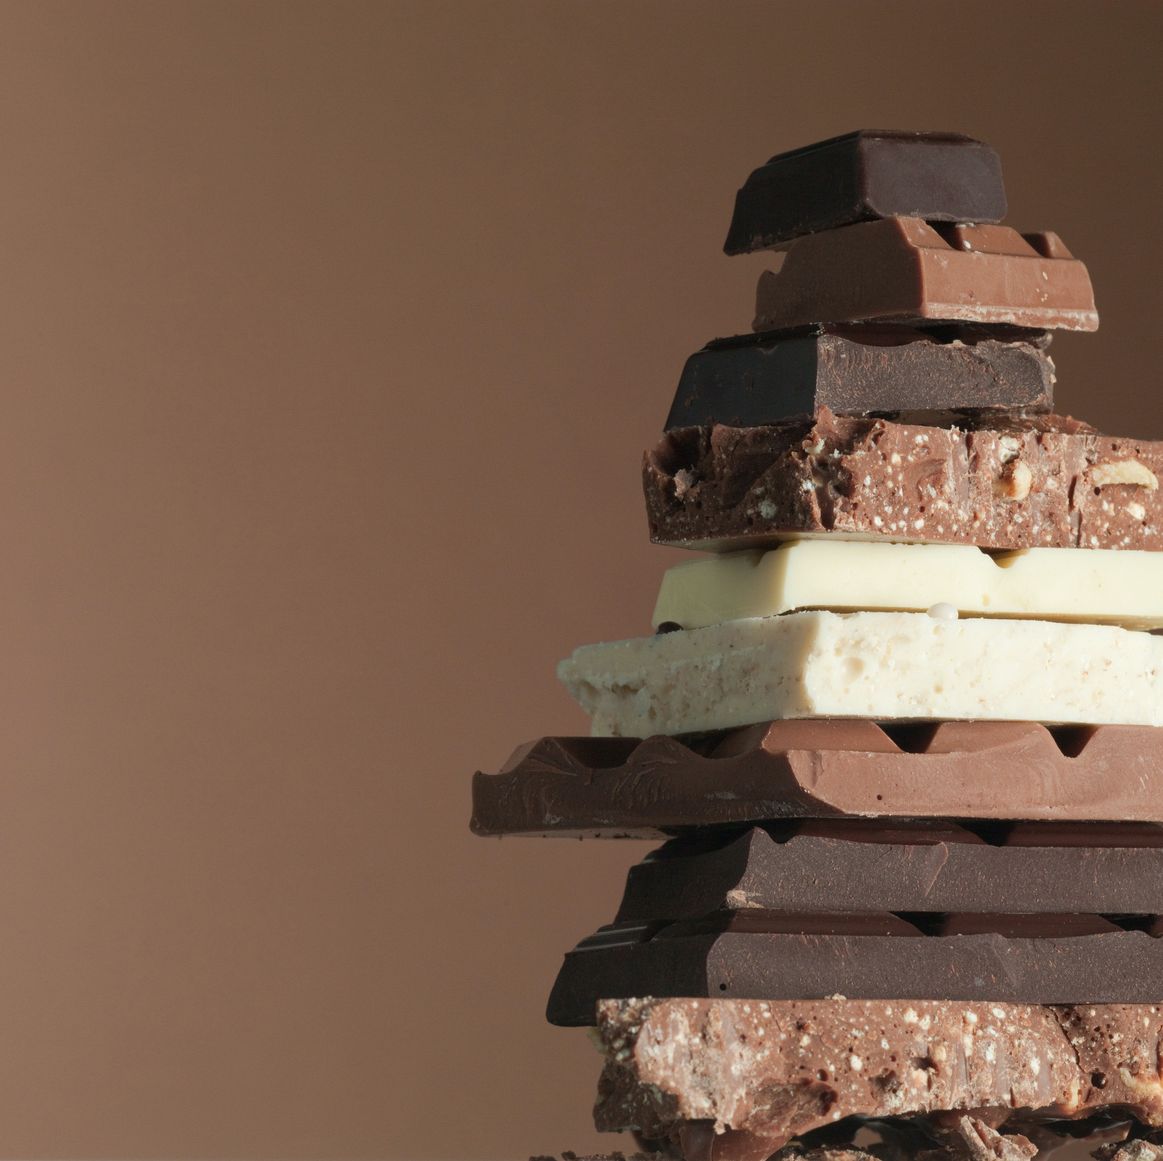 The Best Chocolate Bars for Baking